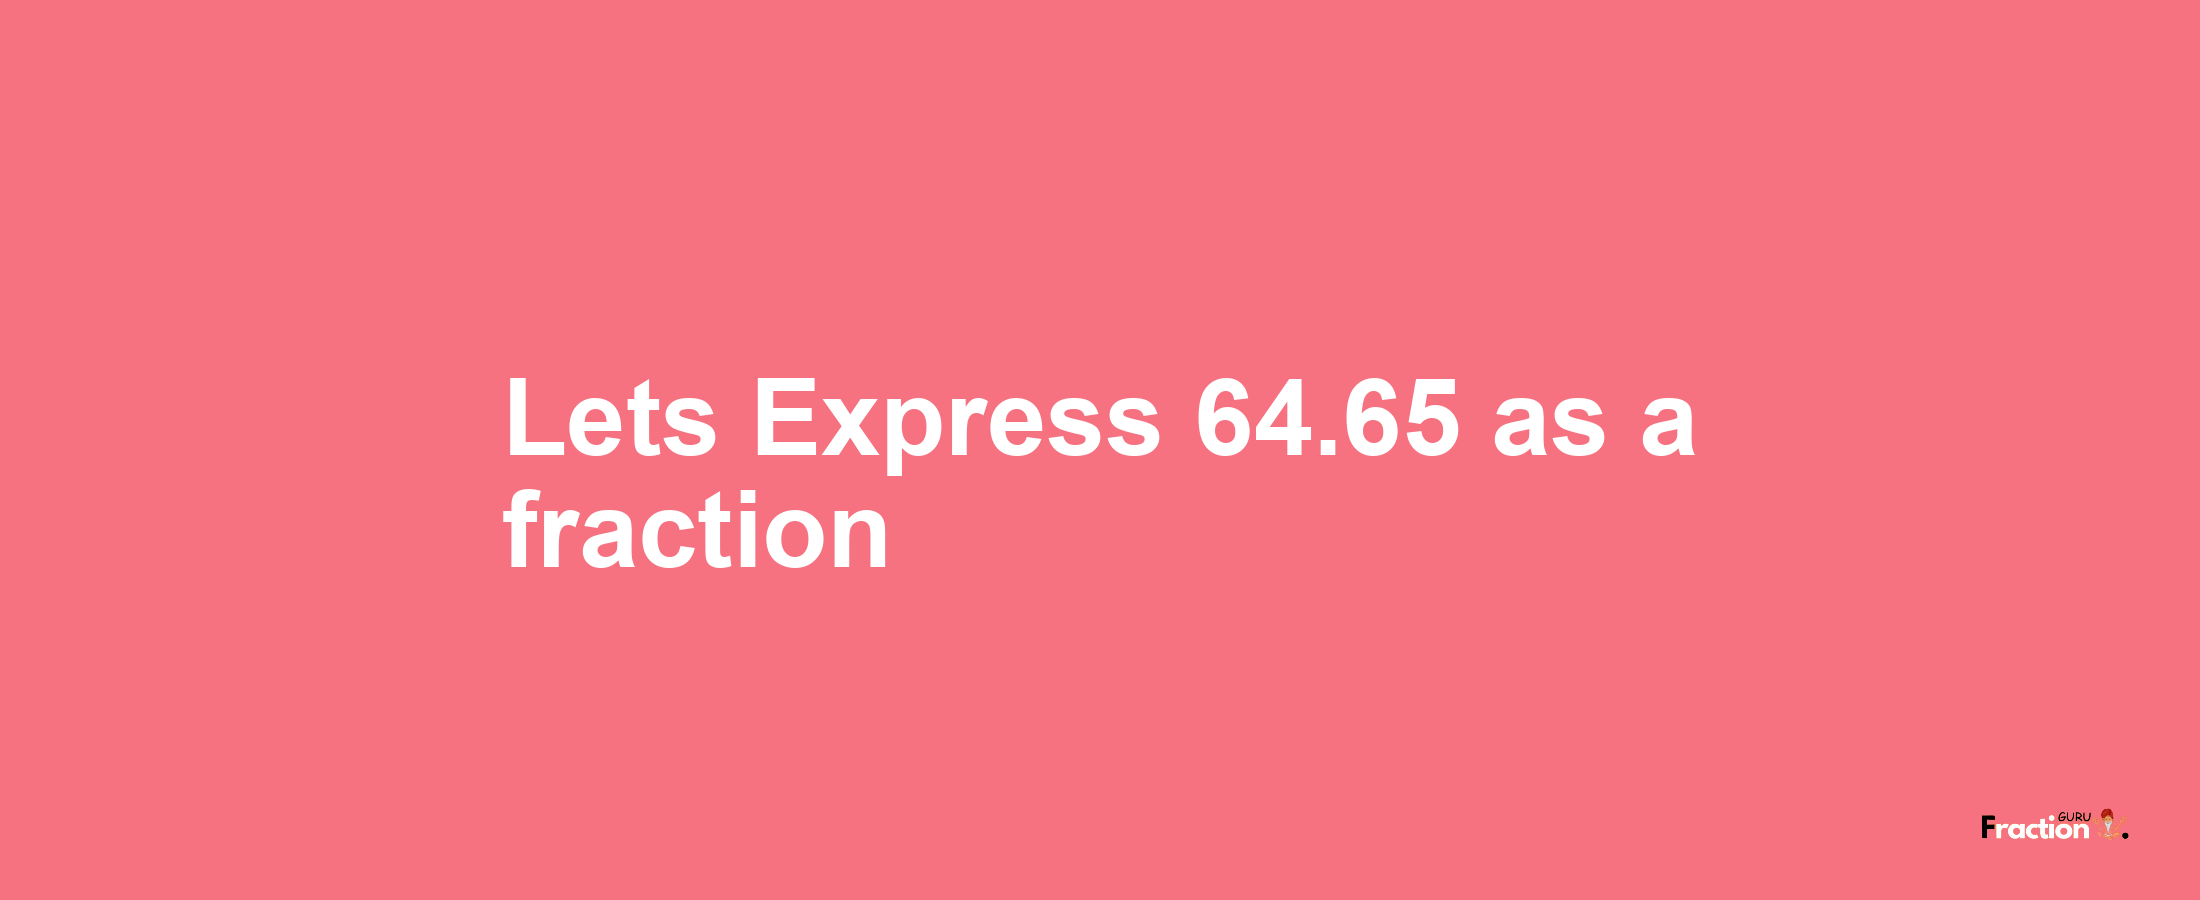 Lets Express 64.65 as afraction